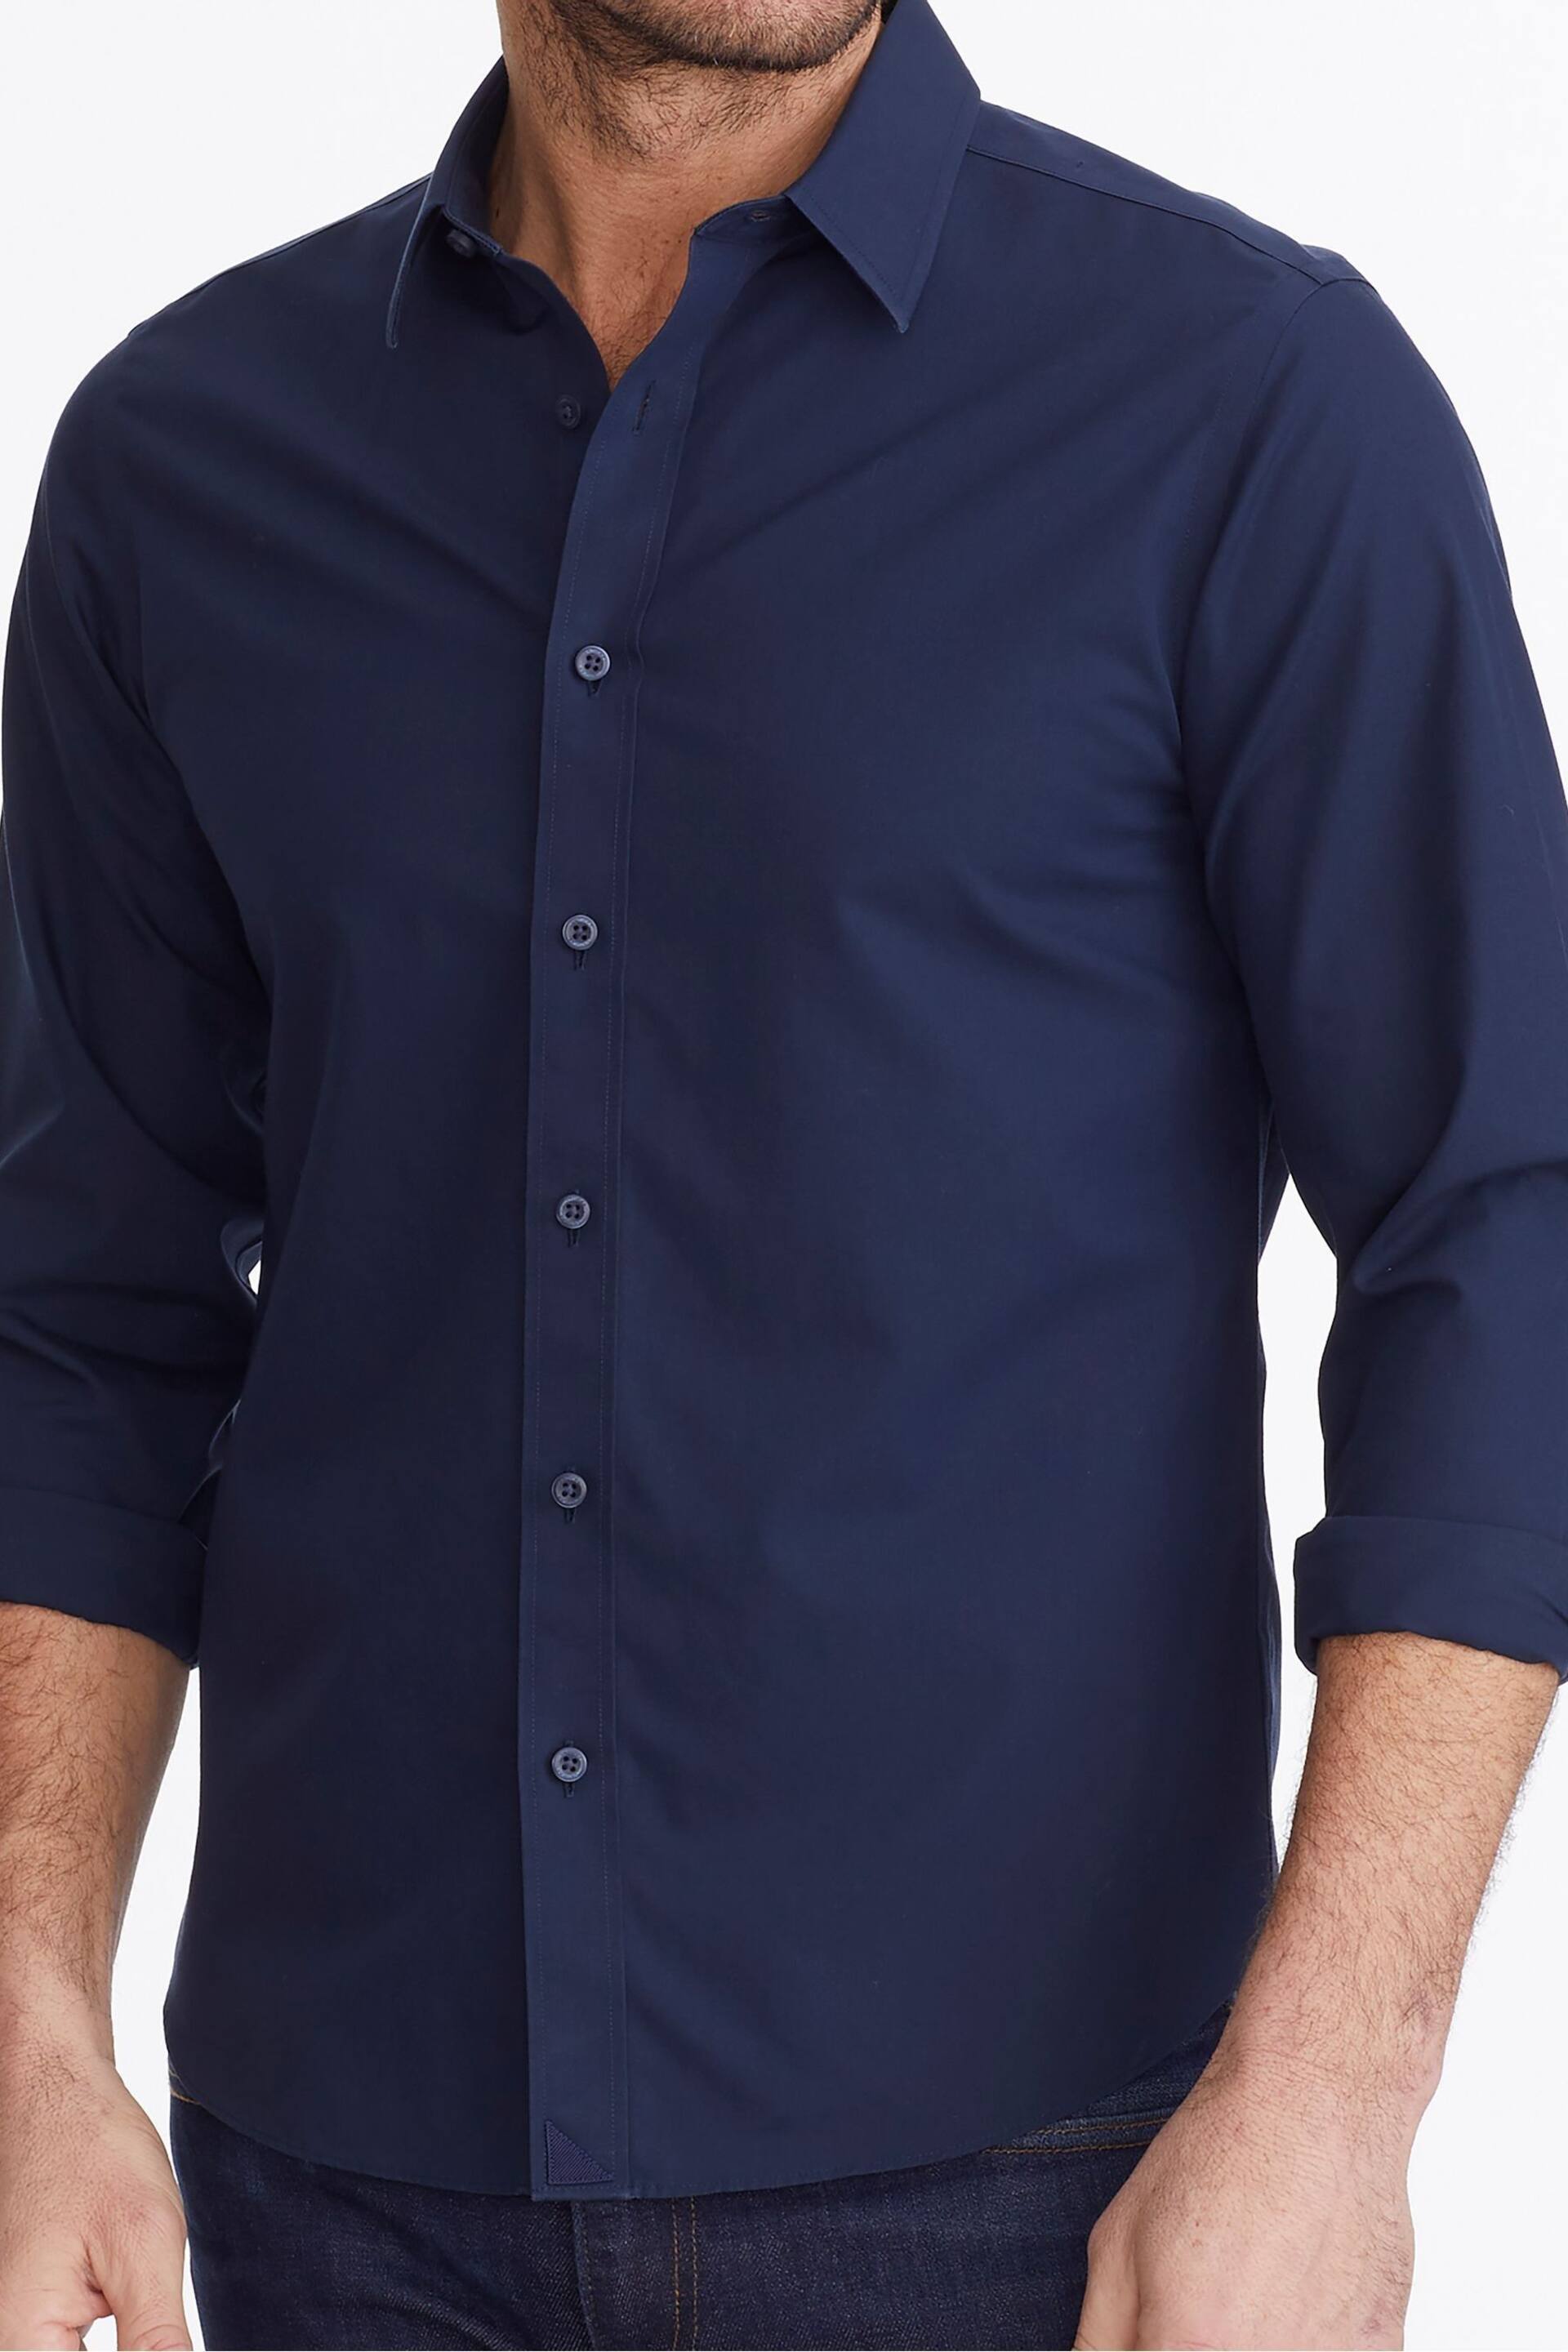 UNTUCKit Navy Blue Wrinkle-Free Relaxed Fit Castello Shirt - Image 6 of 6